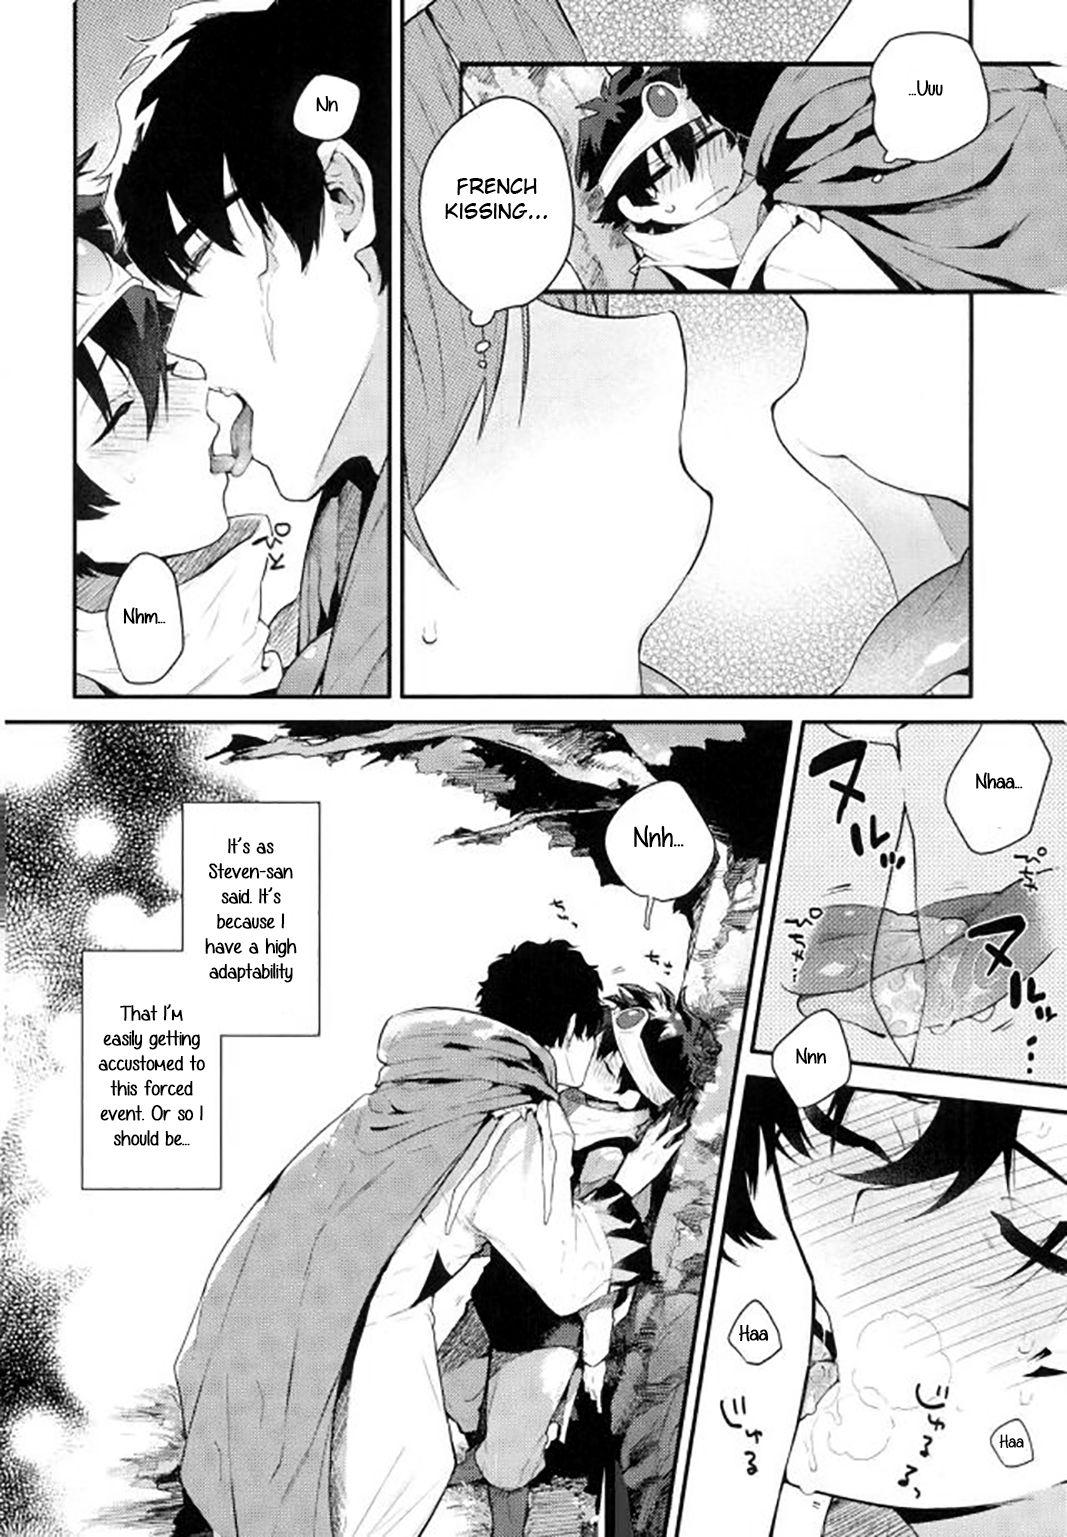 Gay Pornstar After Being Sent to Another World I'm Forced to a Love Event With My Boss!? - Kekkai sensen Leite - Page 7